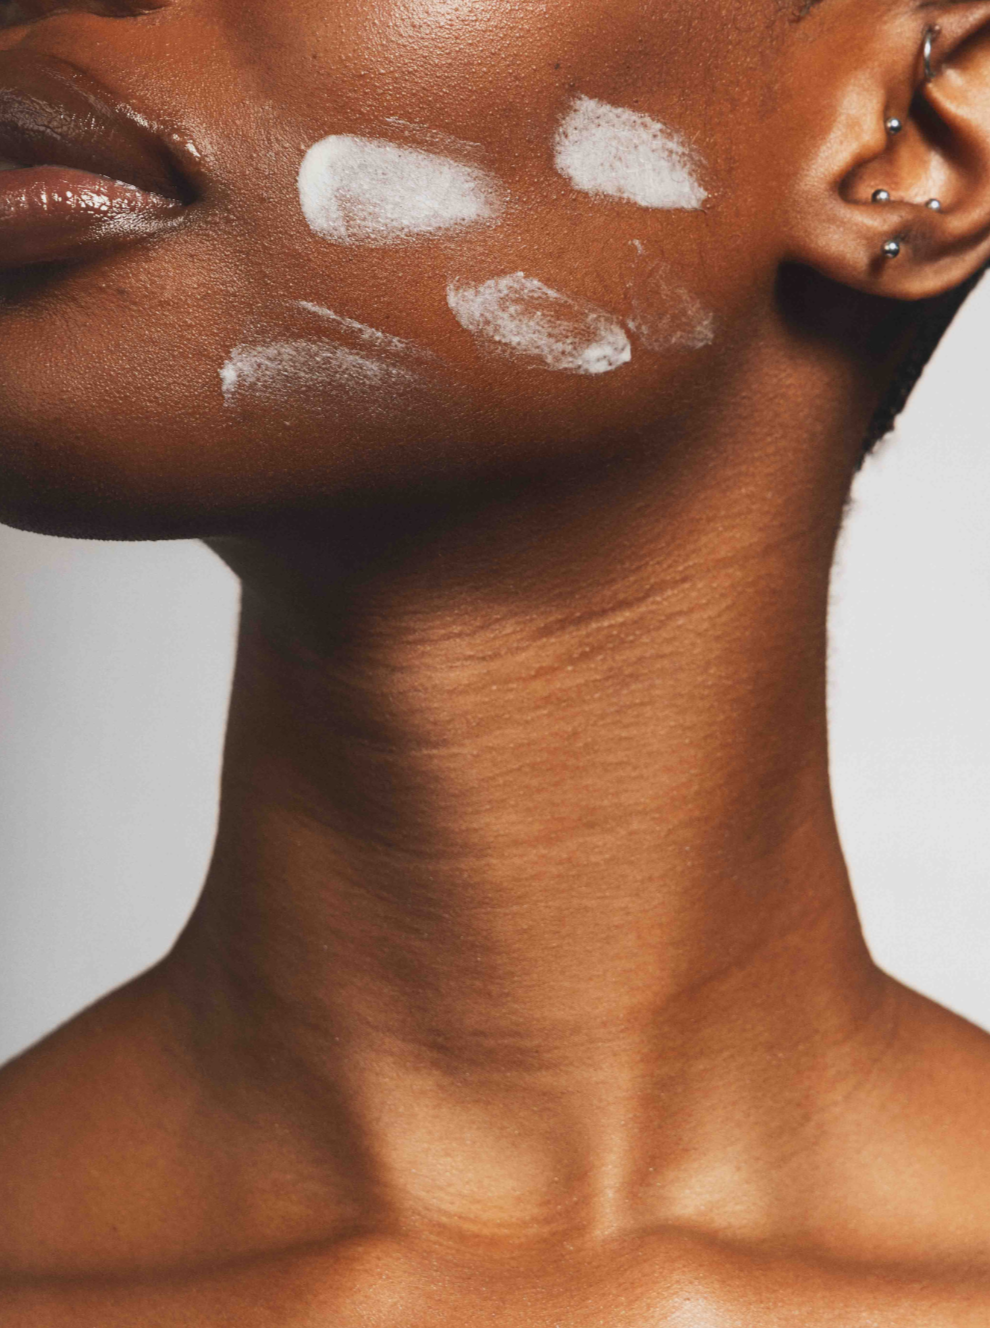 Close-up of model's face and neck with cream applied on her cheek.